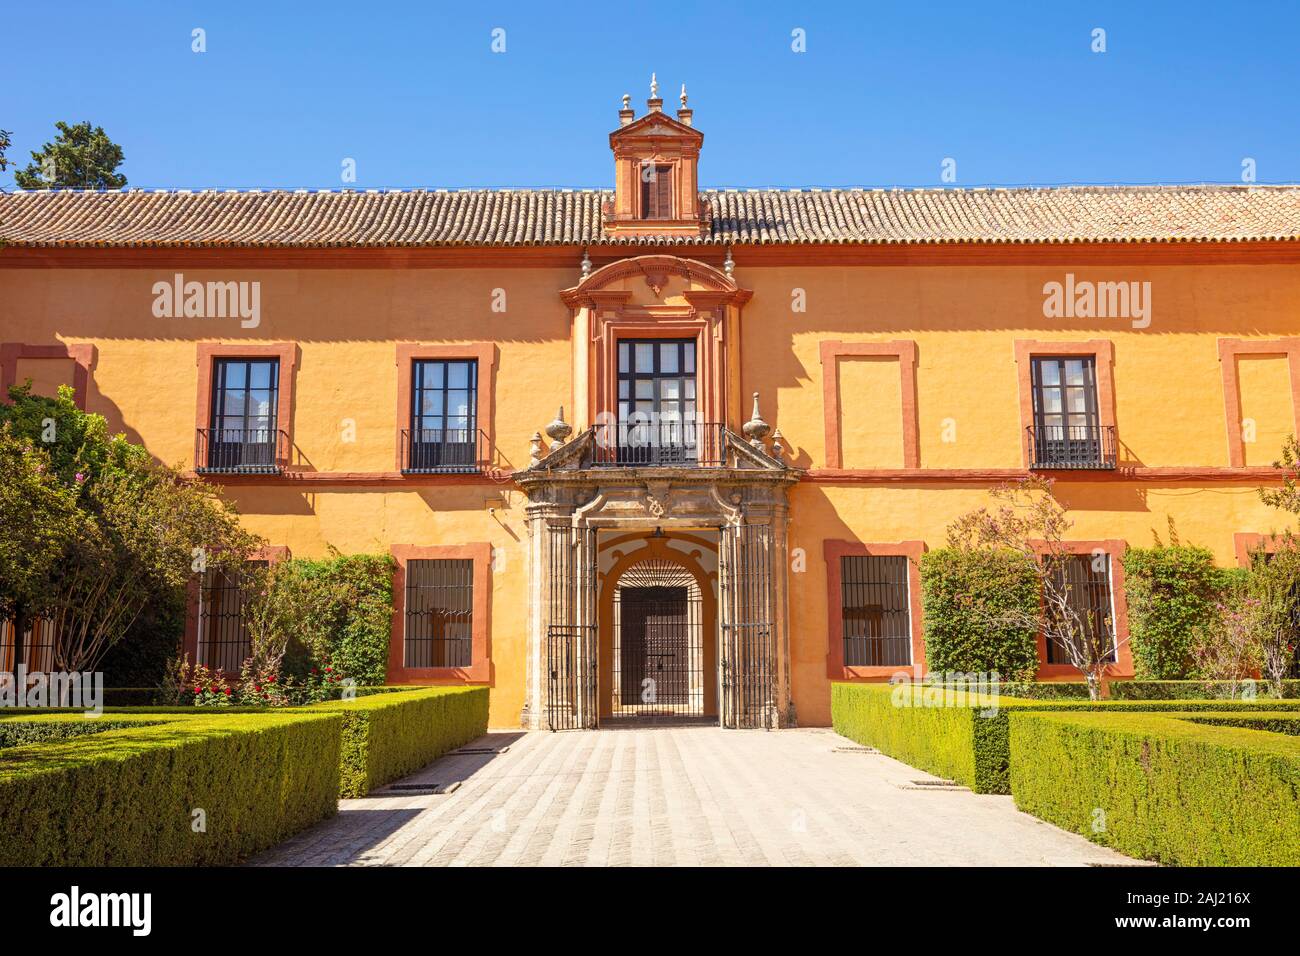 Patio del Crucero (Courtyard of the Crossing) in the Real Alcazar Palace, UNESCO, Seville, Andalusia, Spain, Europe Stock Photo